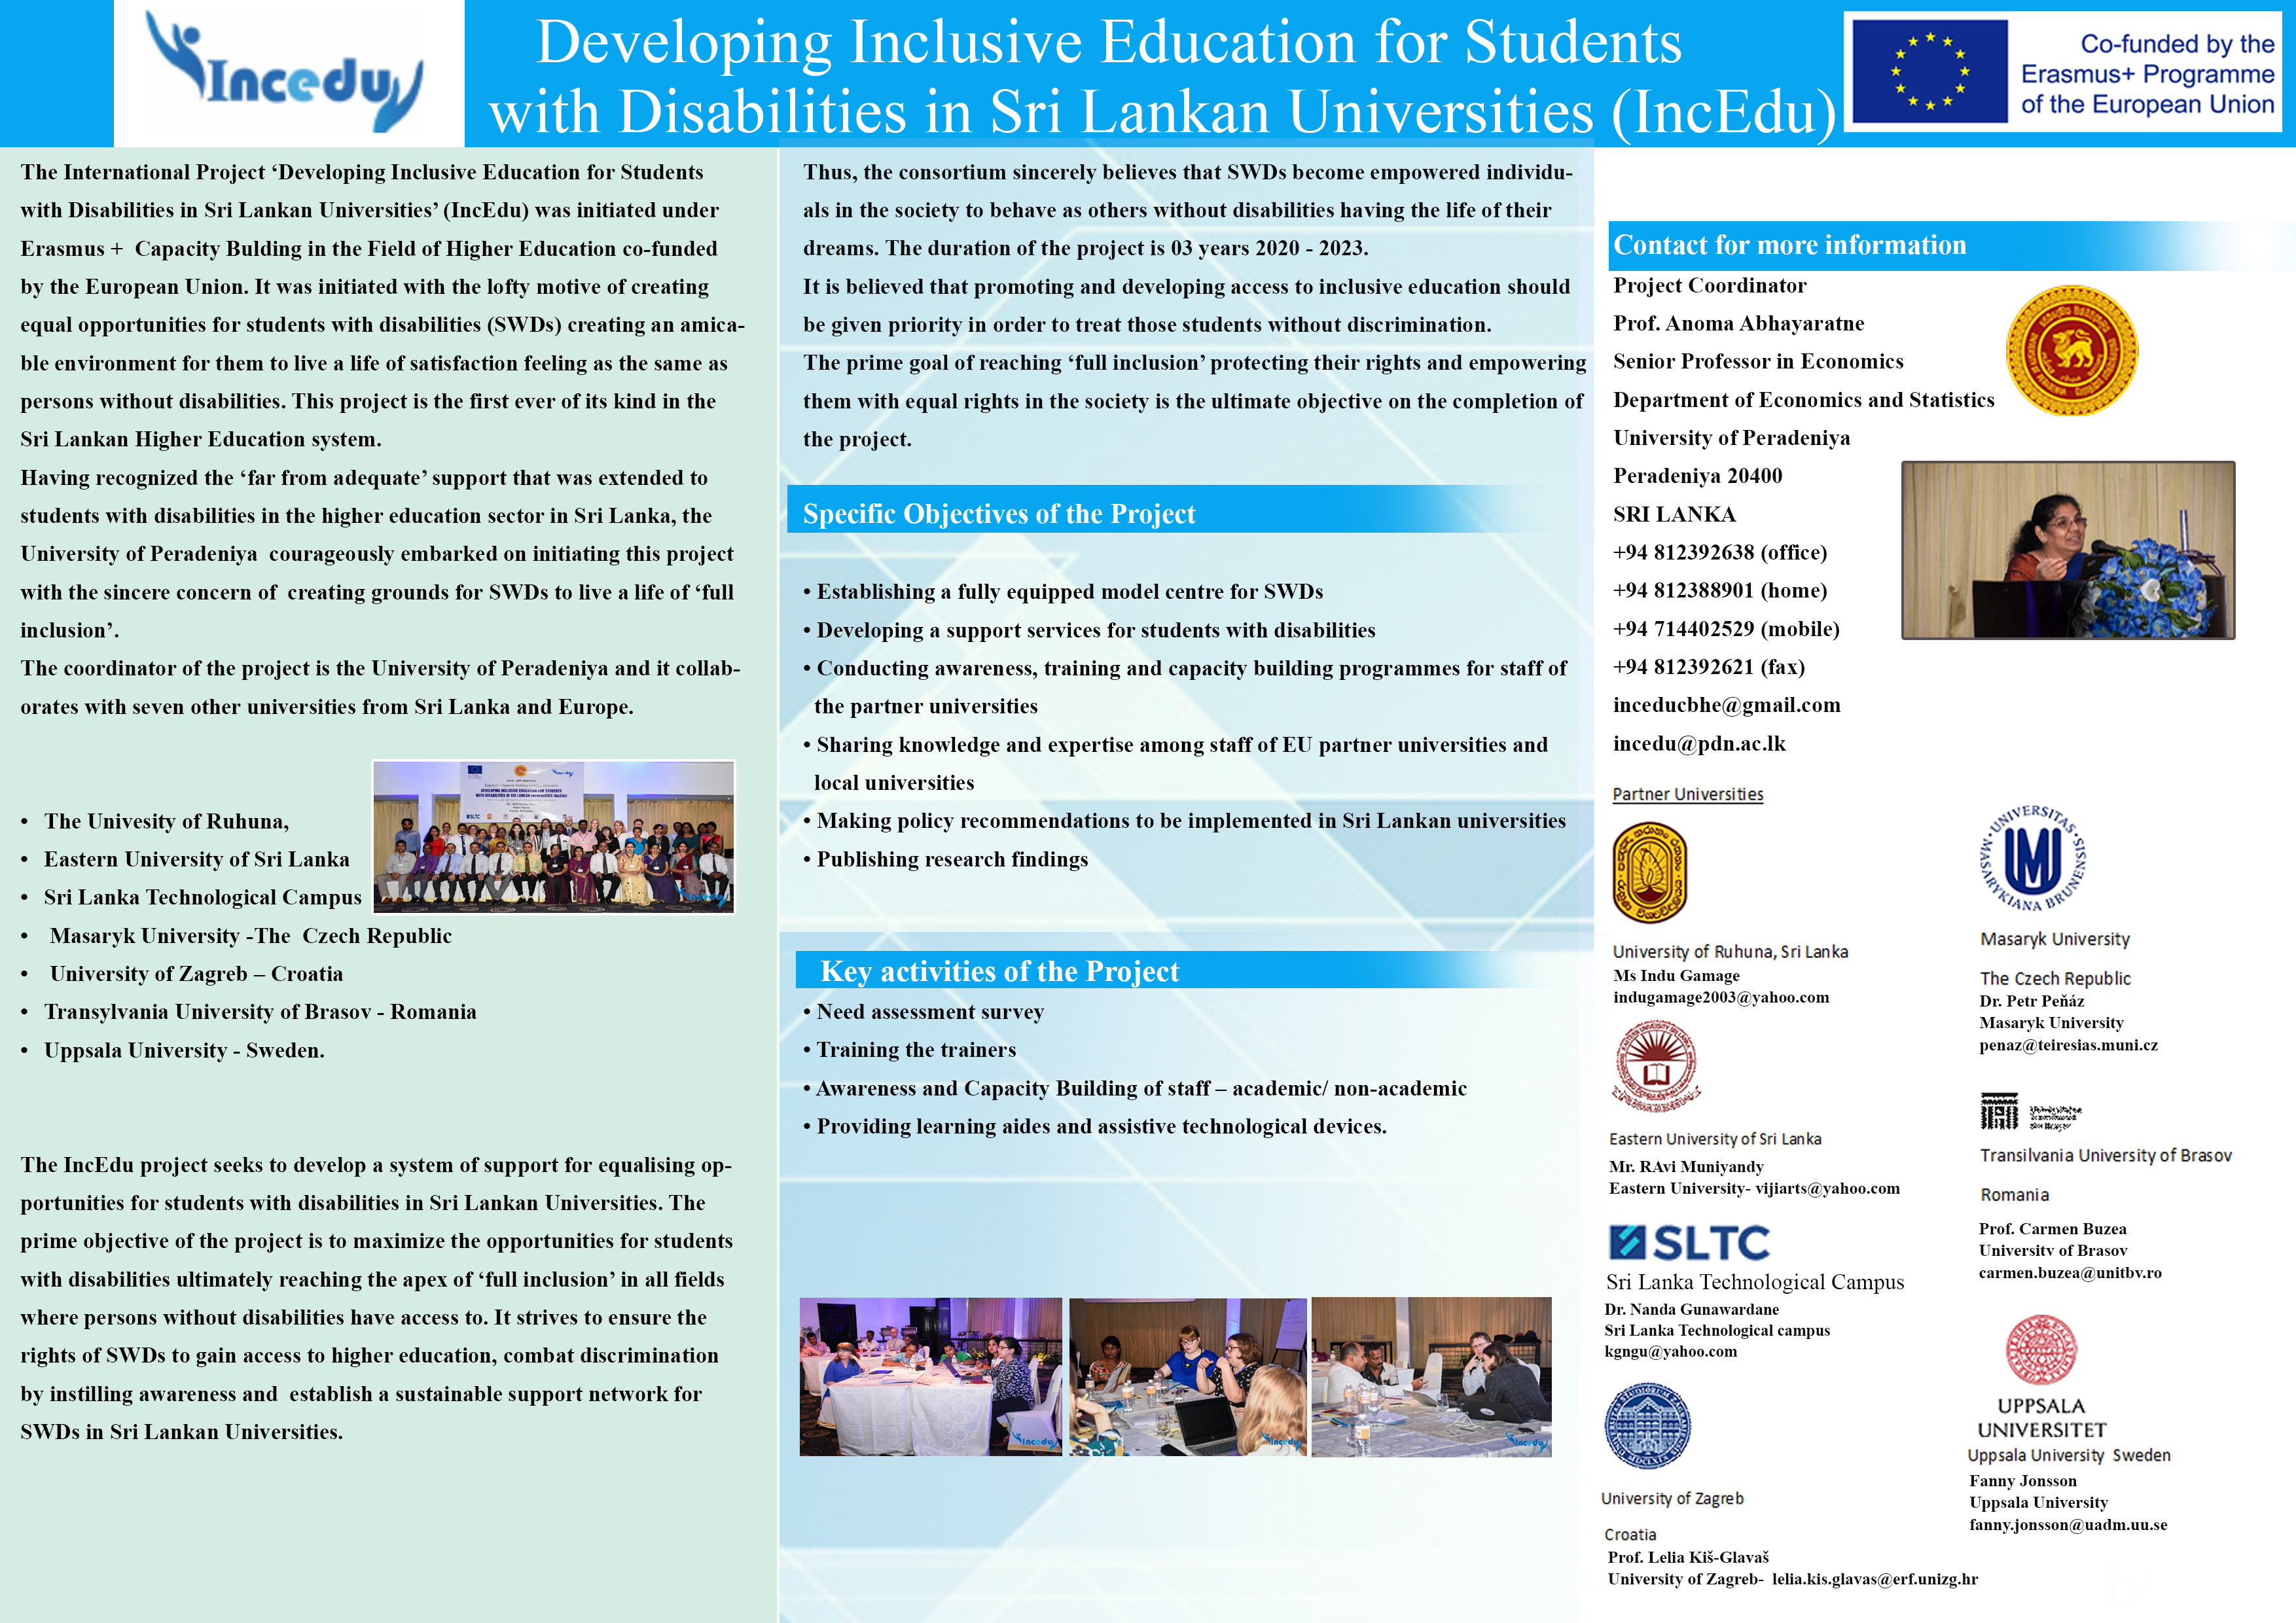 Developing Inclusive Education for students with disabilities in Sri Lankan Universities (IncEdu)